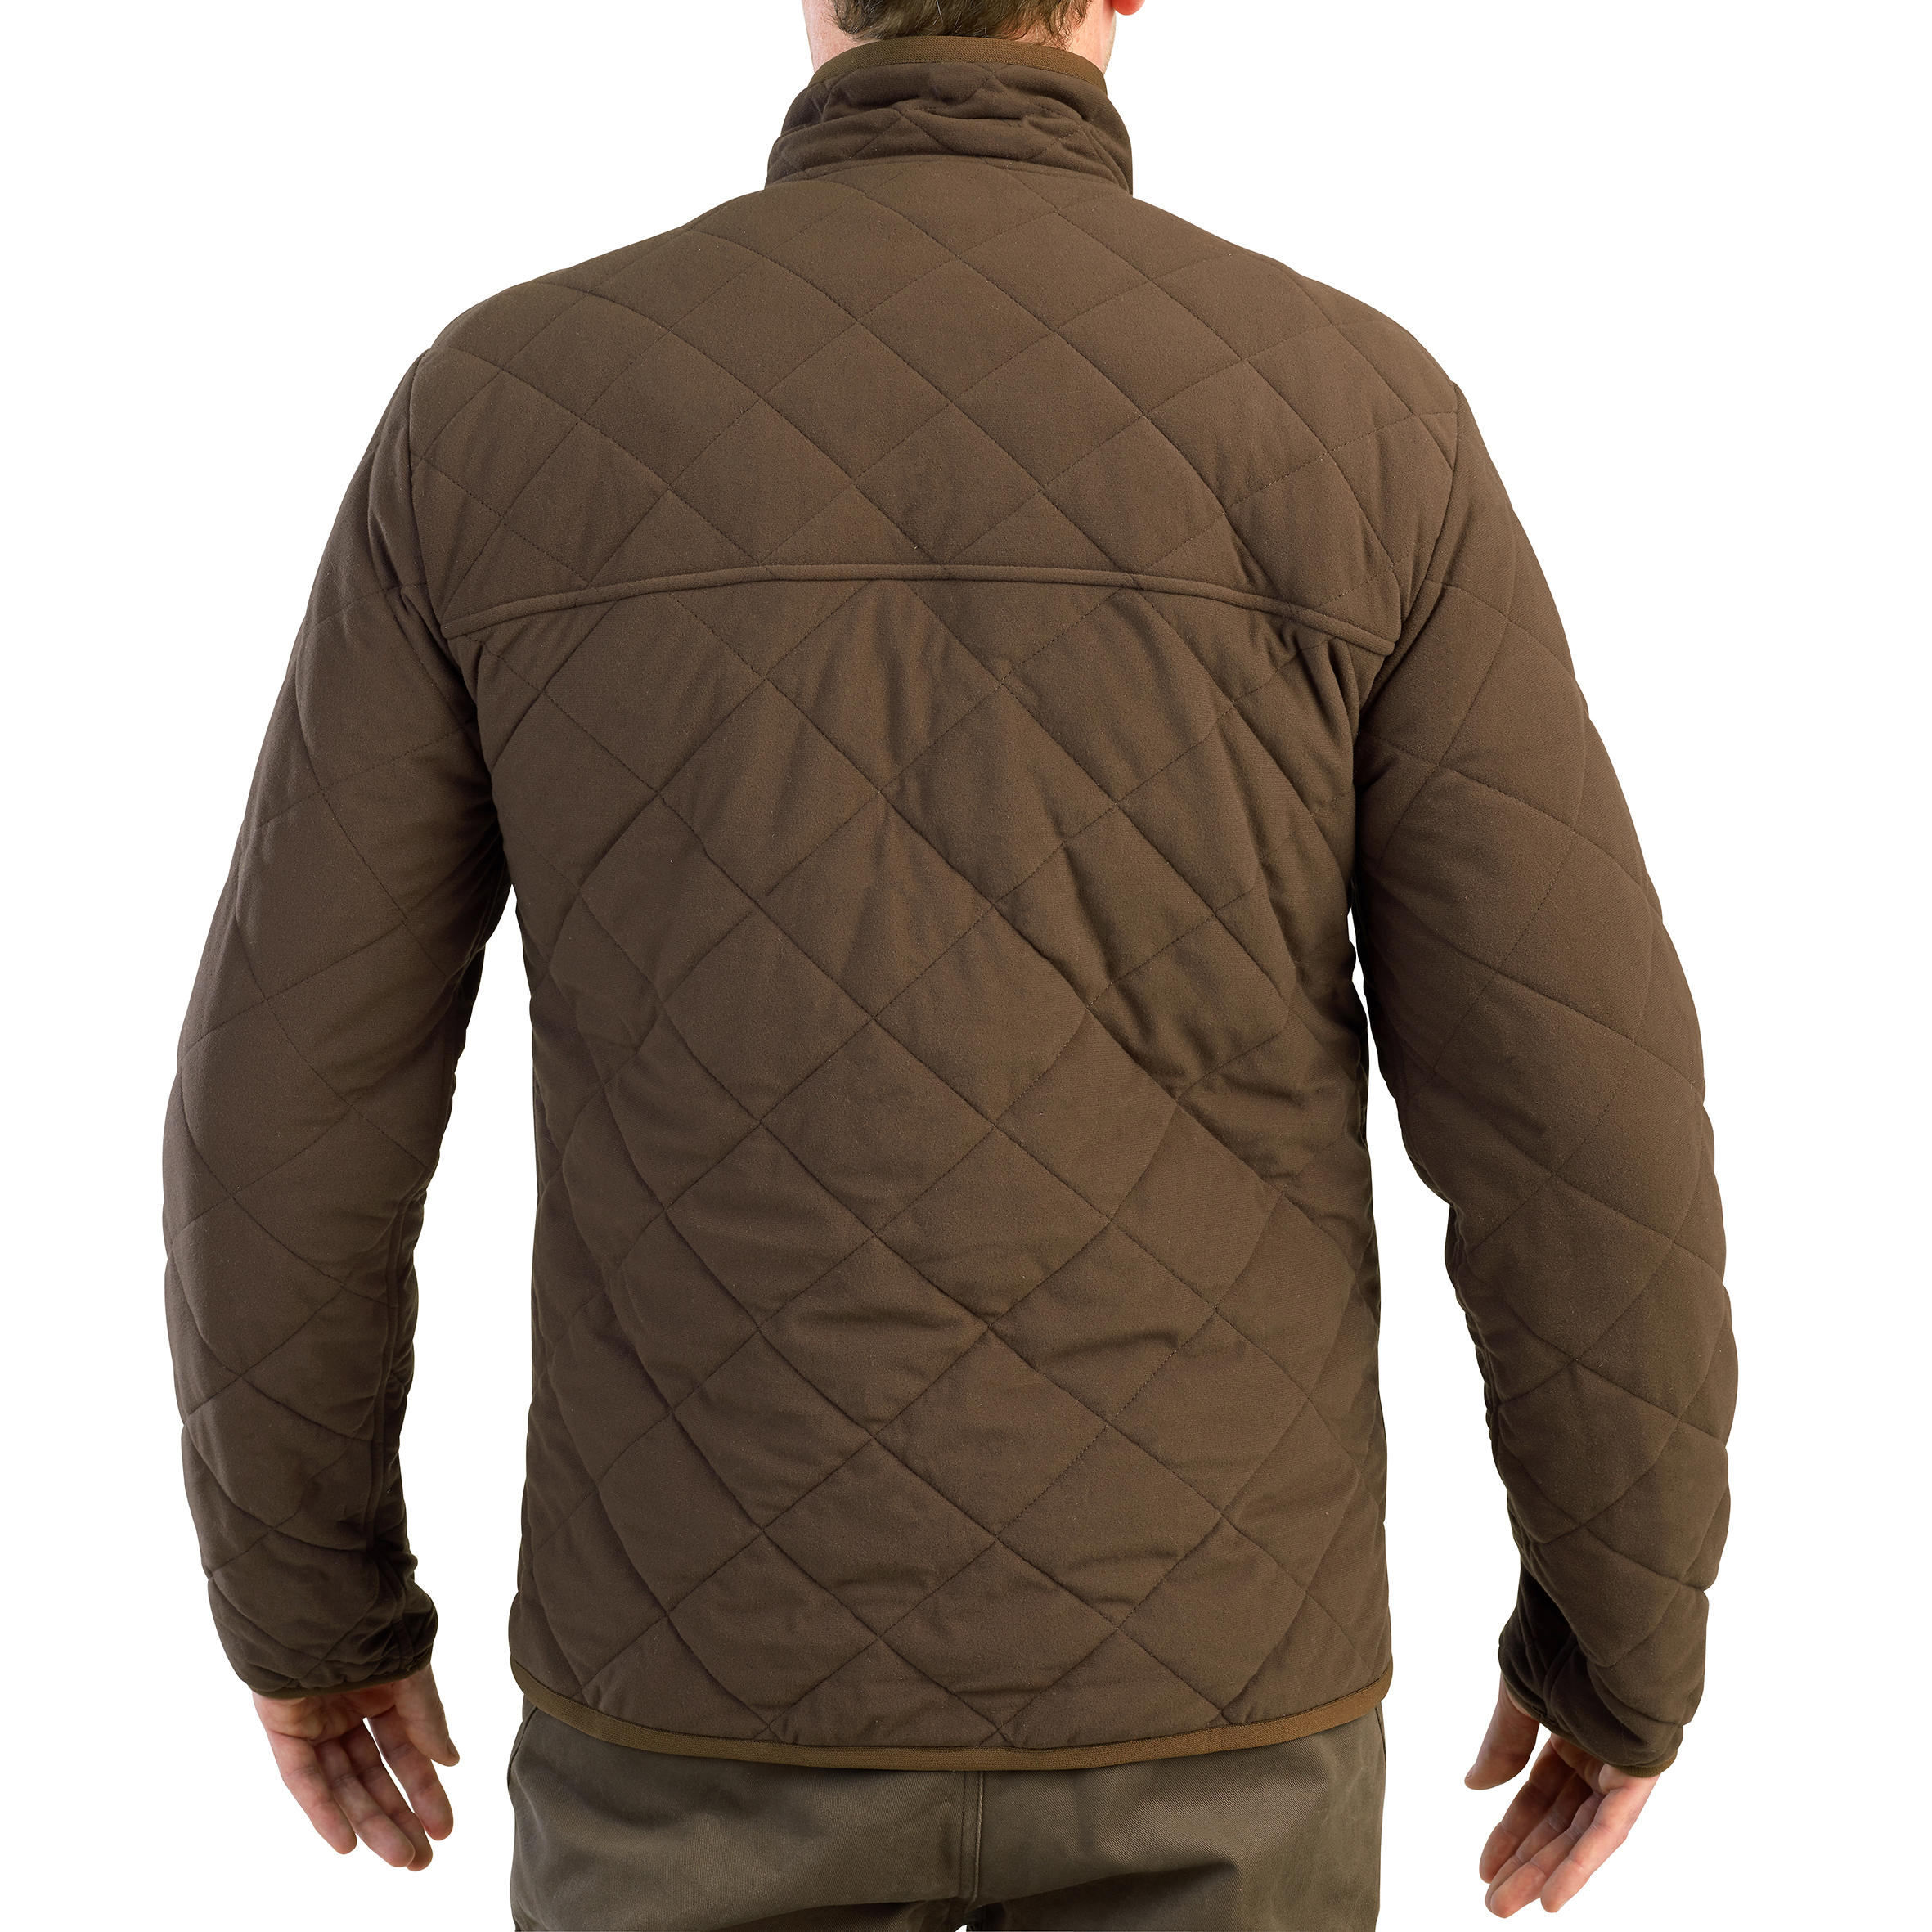 Silent padded jacket brown 500 2/3